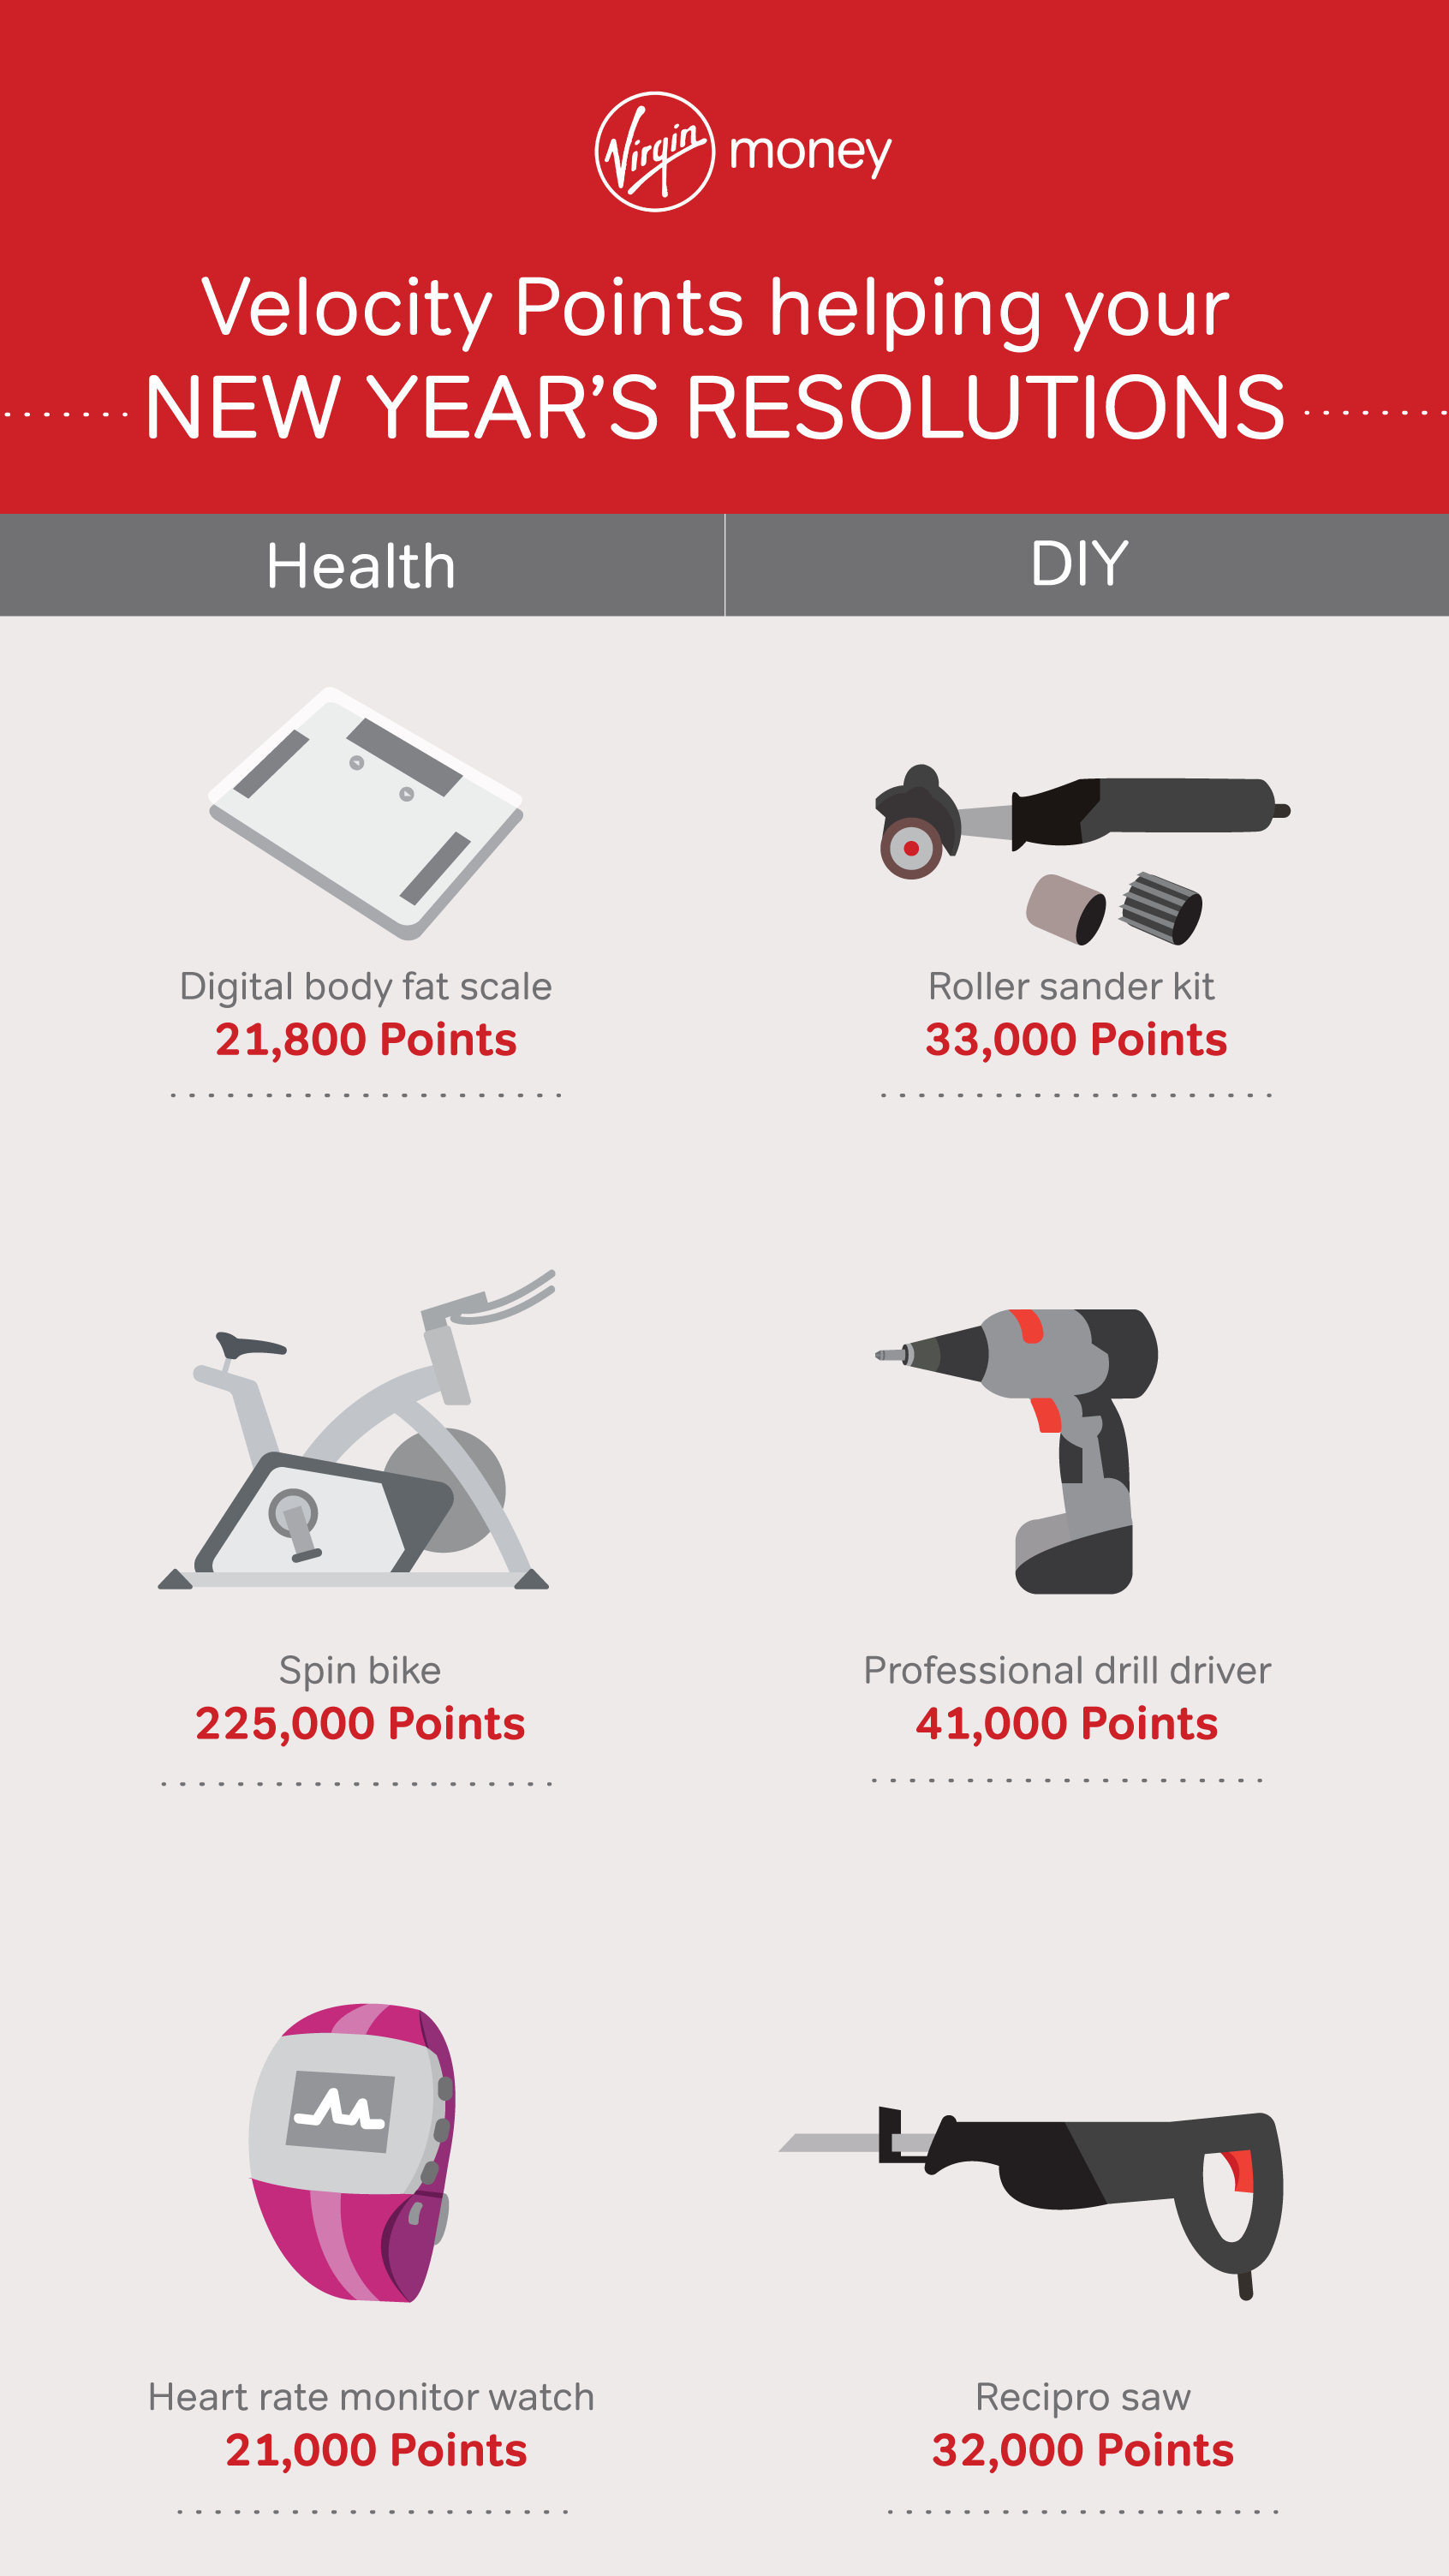 Velocity Points helping your New Year's resolutions